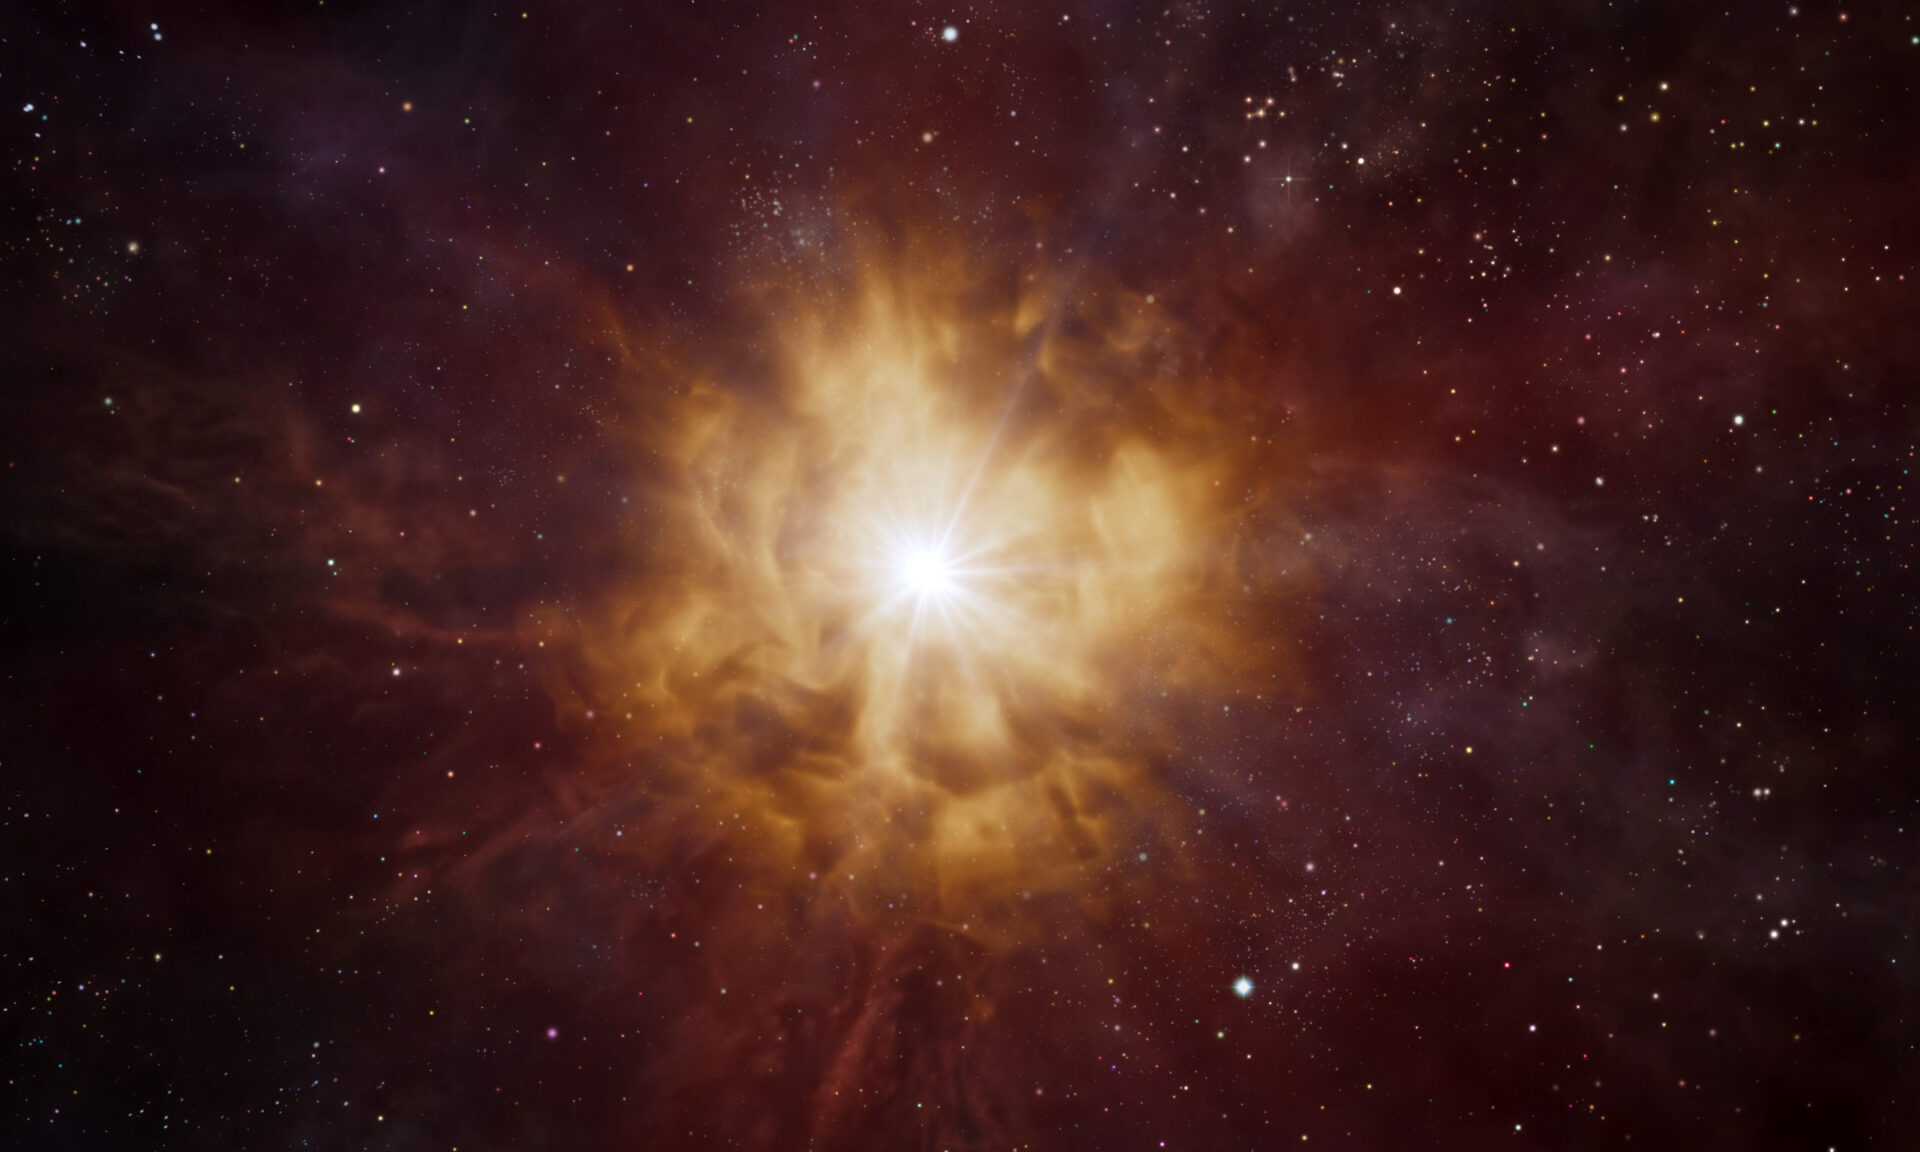 <p>This artist’s impression shows the bright core of a Wolf–Rayet star surrounded by a nebula of material which has been expelled by the star itself.<br />
Wolf–Rayet stars are hot and massive with lifespans of a few million years. They are thought to end in dramatic supernova explosions, ejecting the elements forged in their cores into the cosmos.<br />
Credit: ESO/L. Calçada</p>
